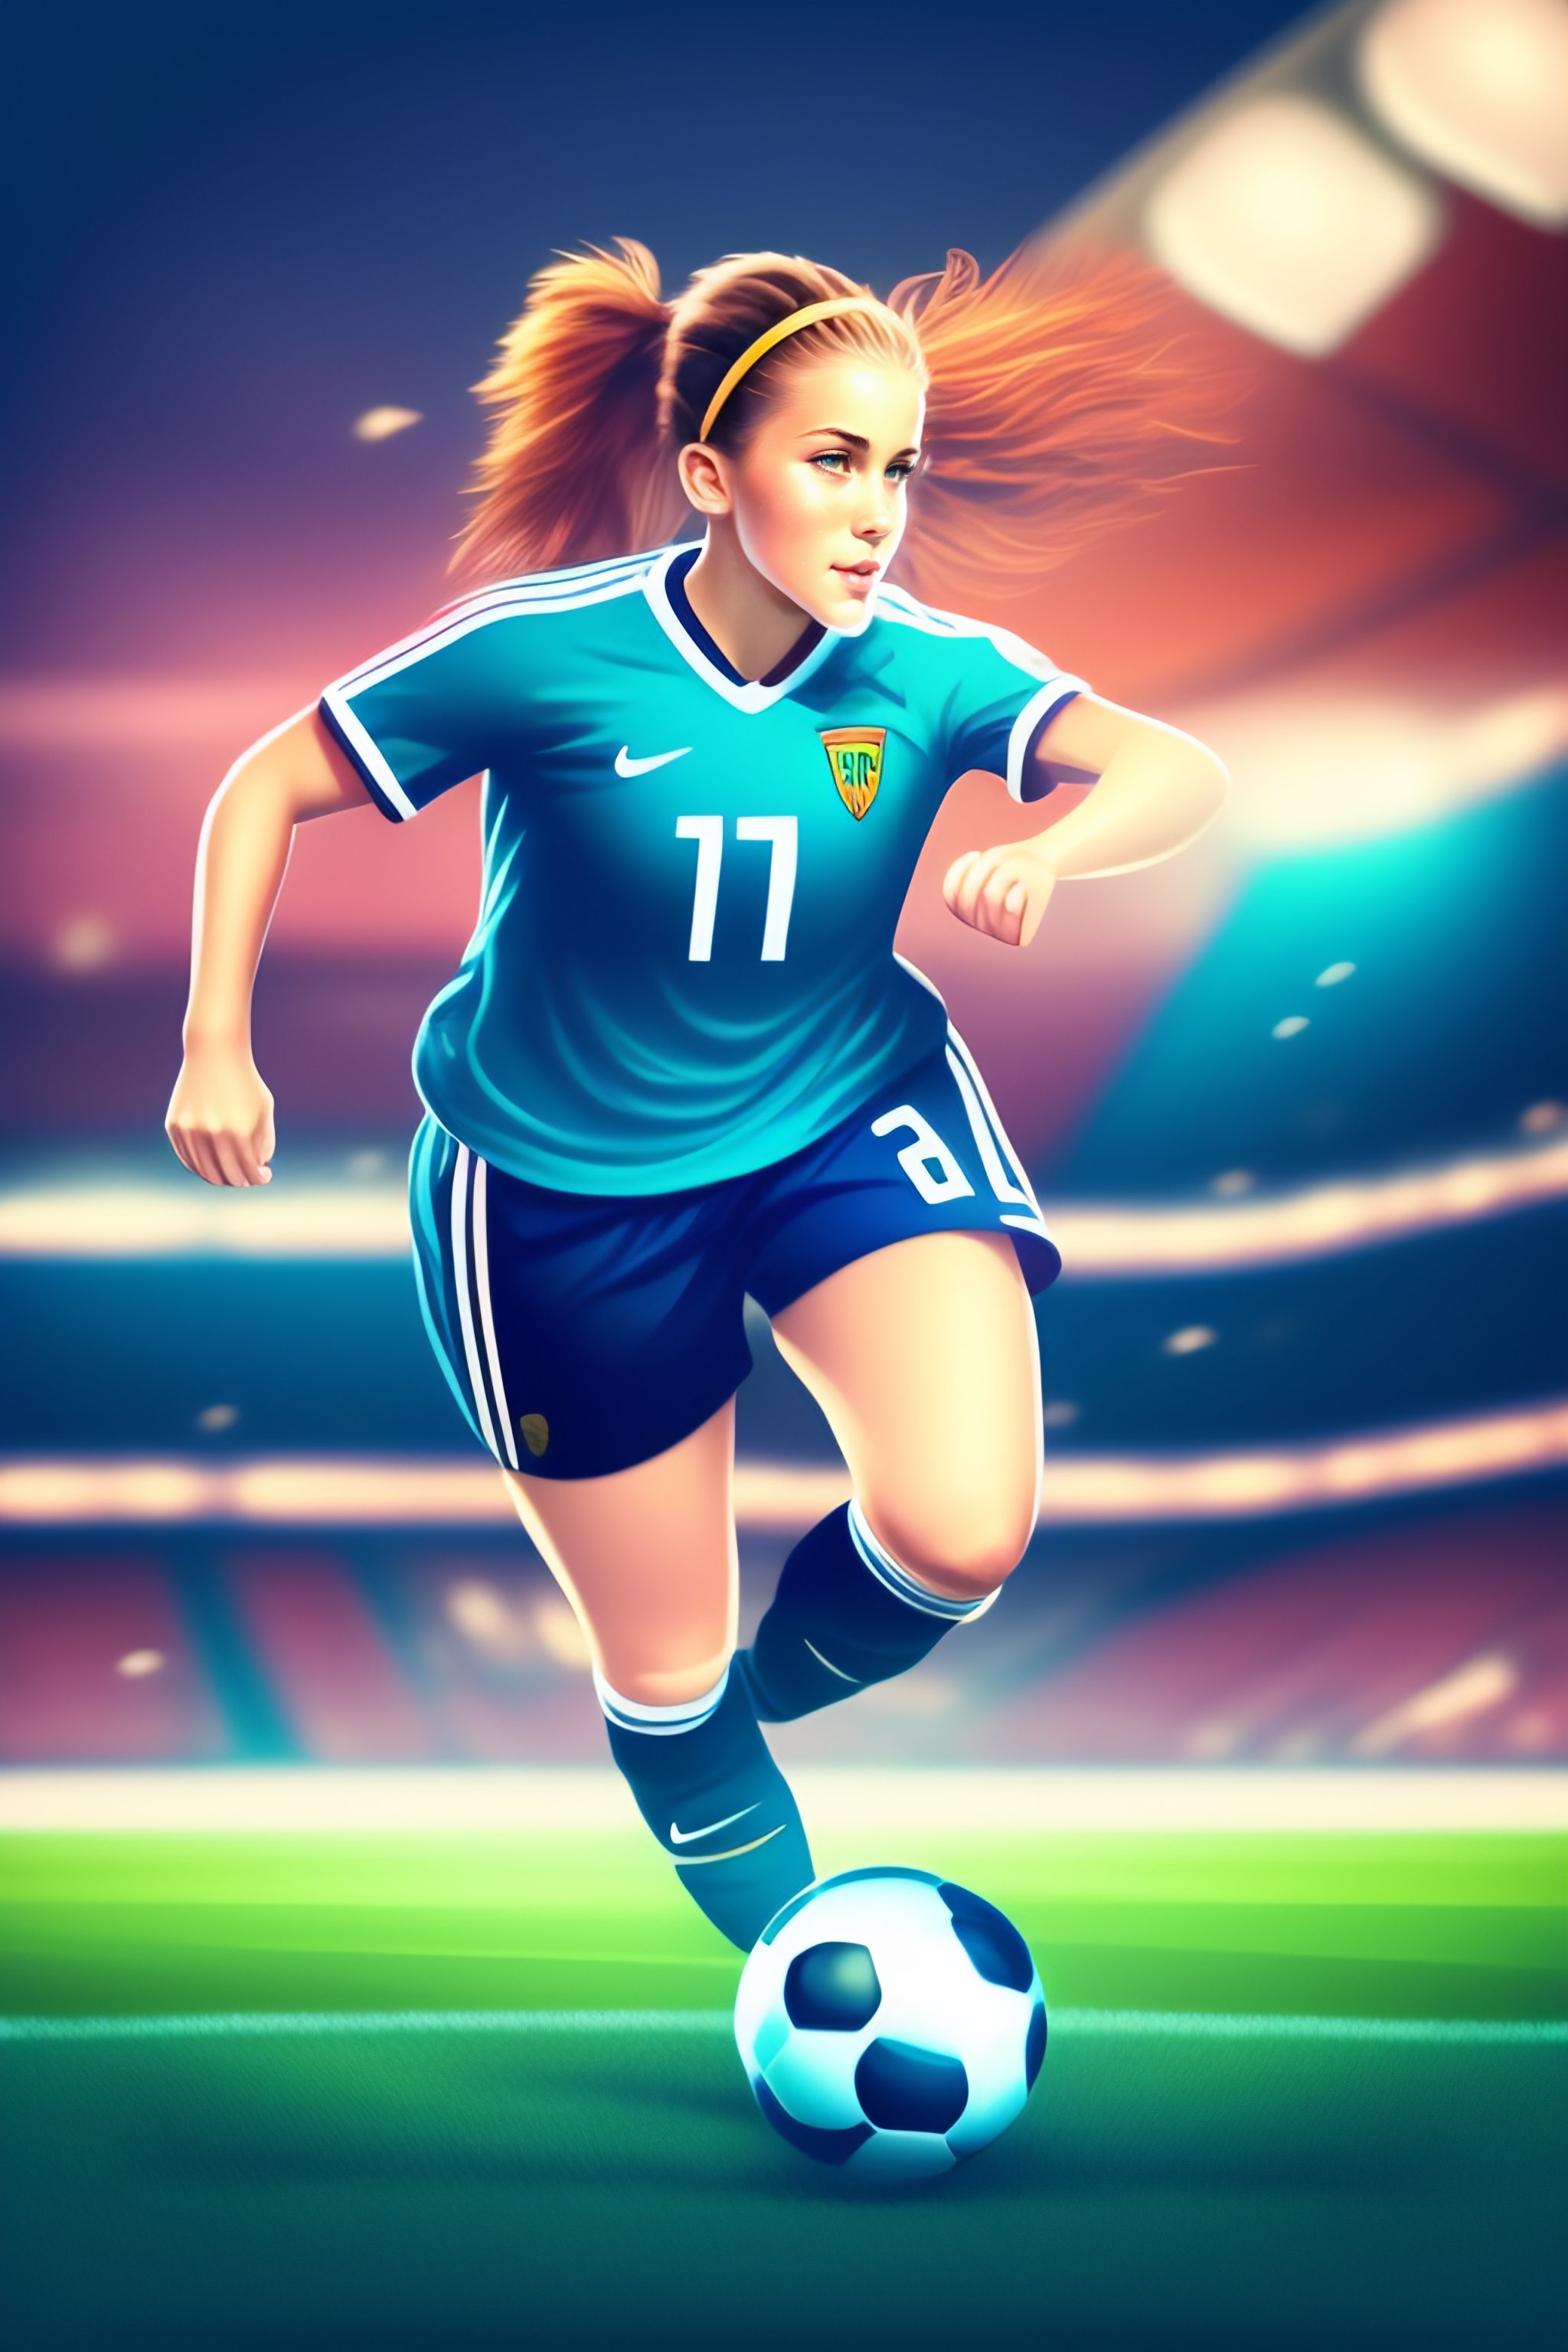 soccer player animated